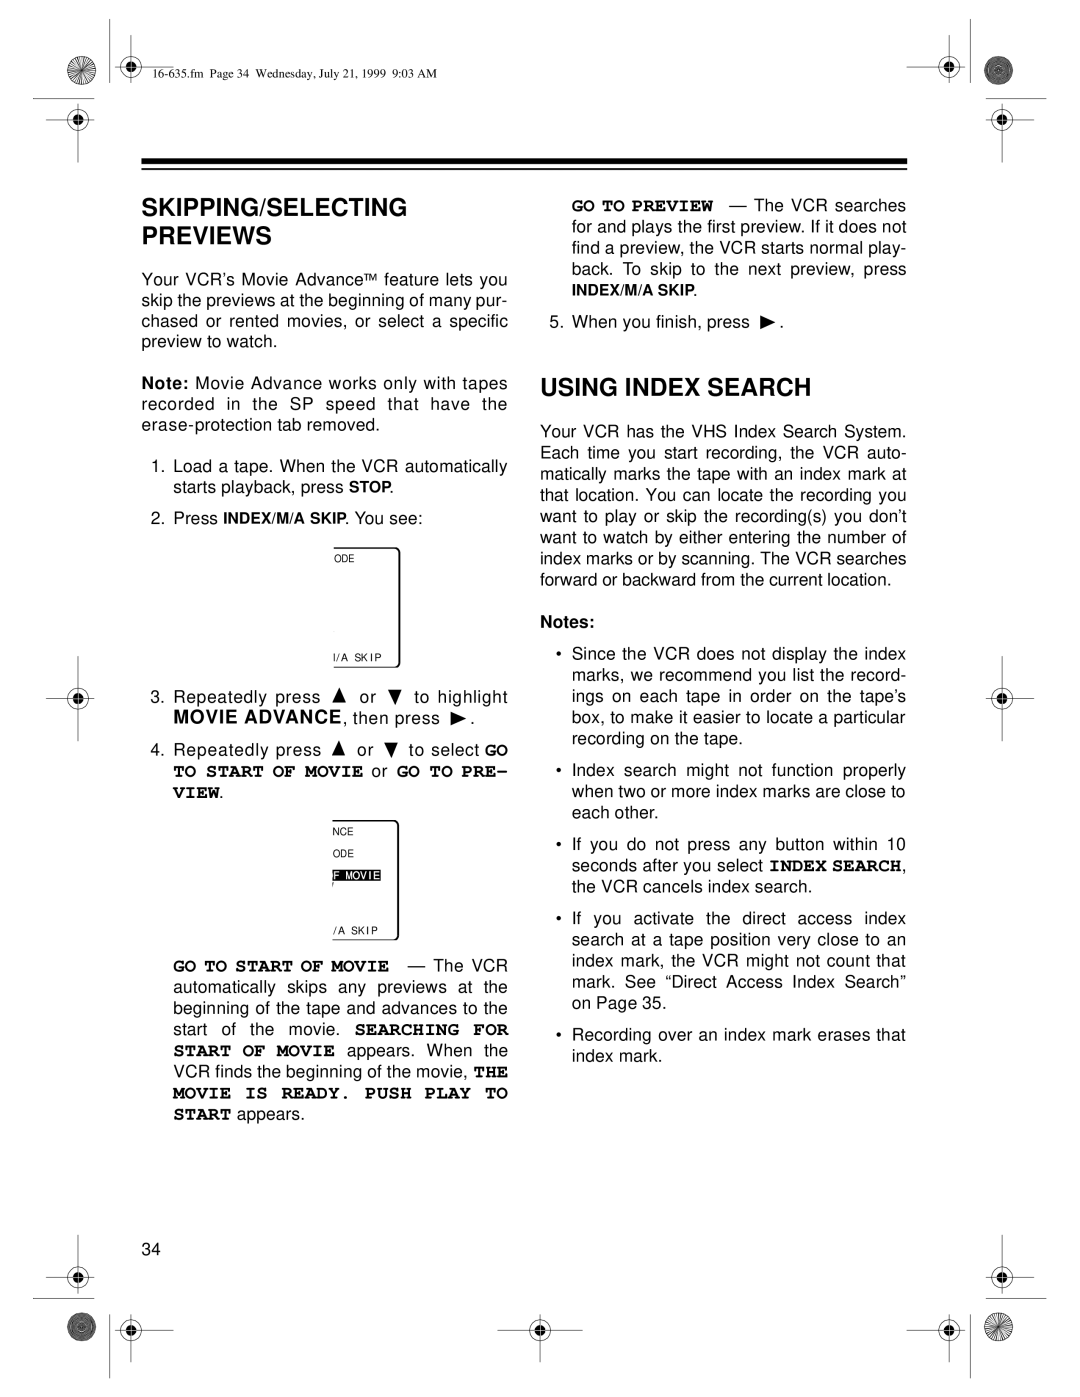 Radio Shack 66 owner manual Skipping/Selecting Previews, Using Index Search, MOVIE IS READY. PUSH PLAY TO START appears 